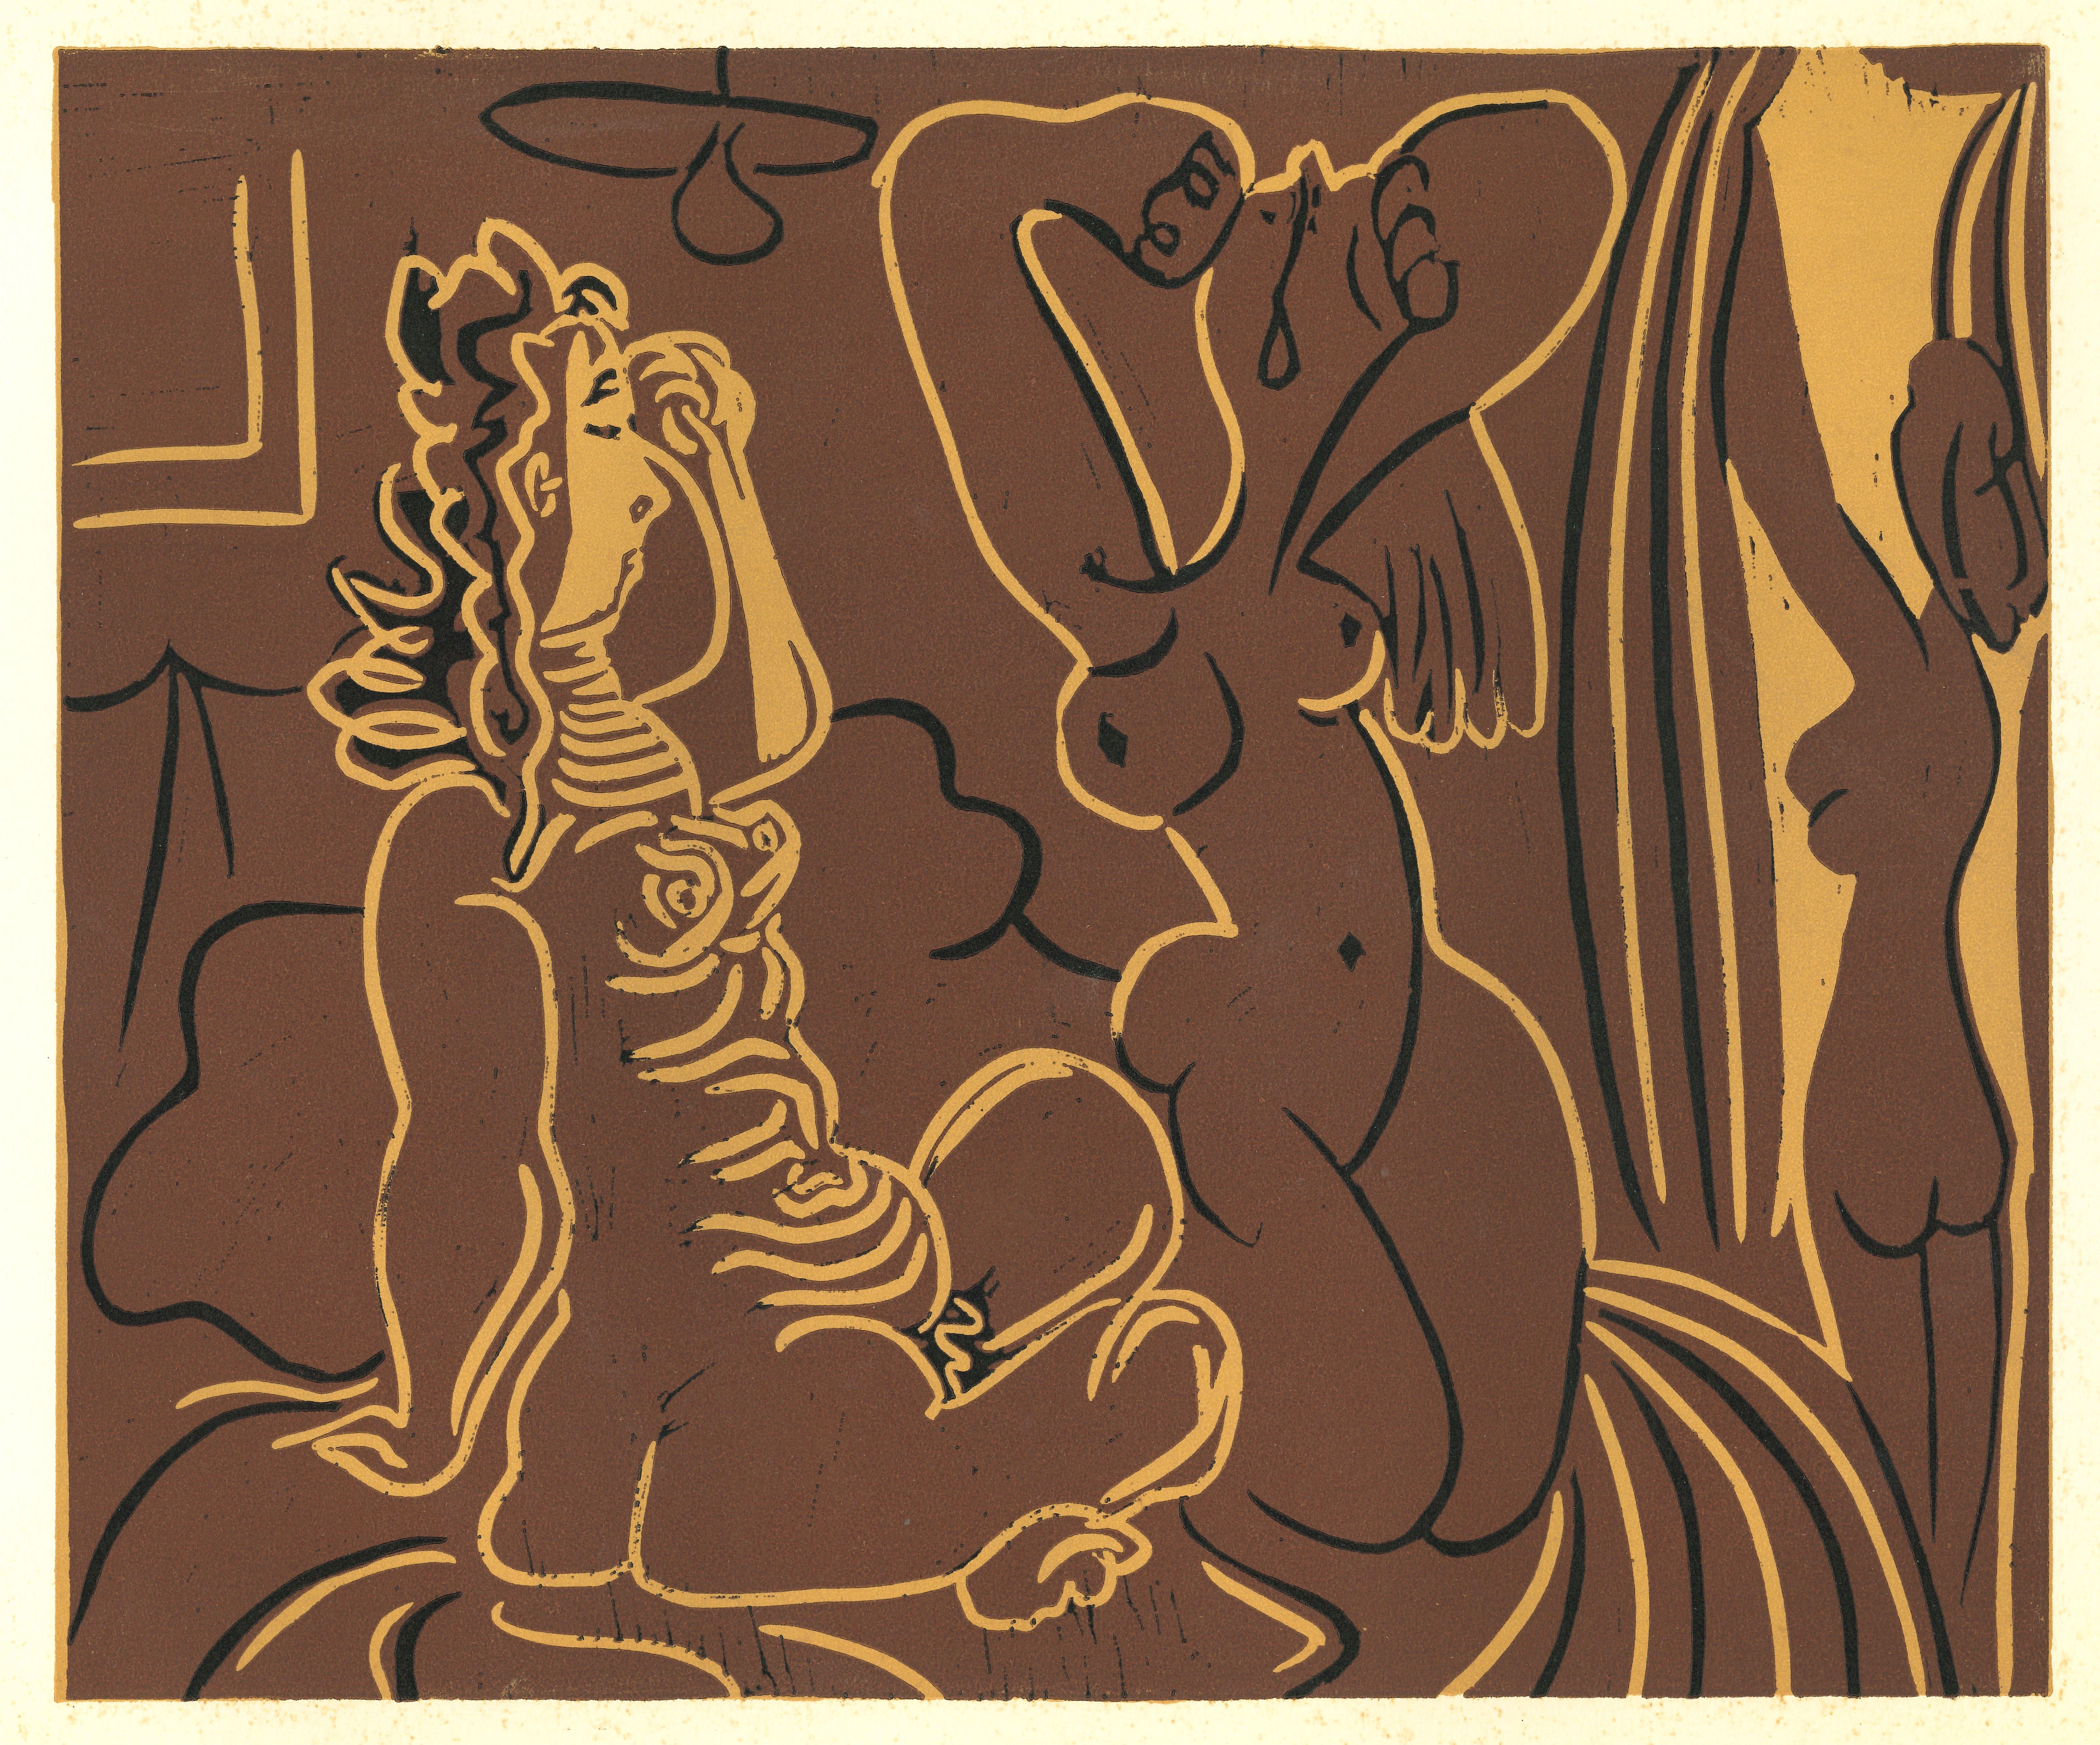 after) Pablo Picasso - Trois Femmes - Linocut Reproduction After Pablo  Picasso - 1962 at 1stDibs